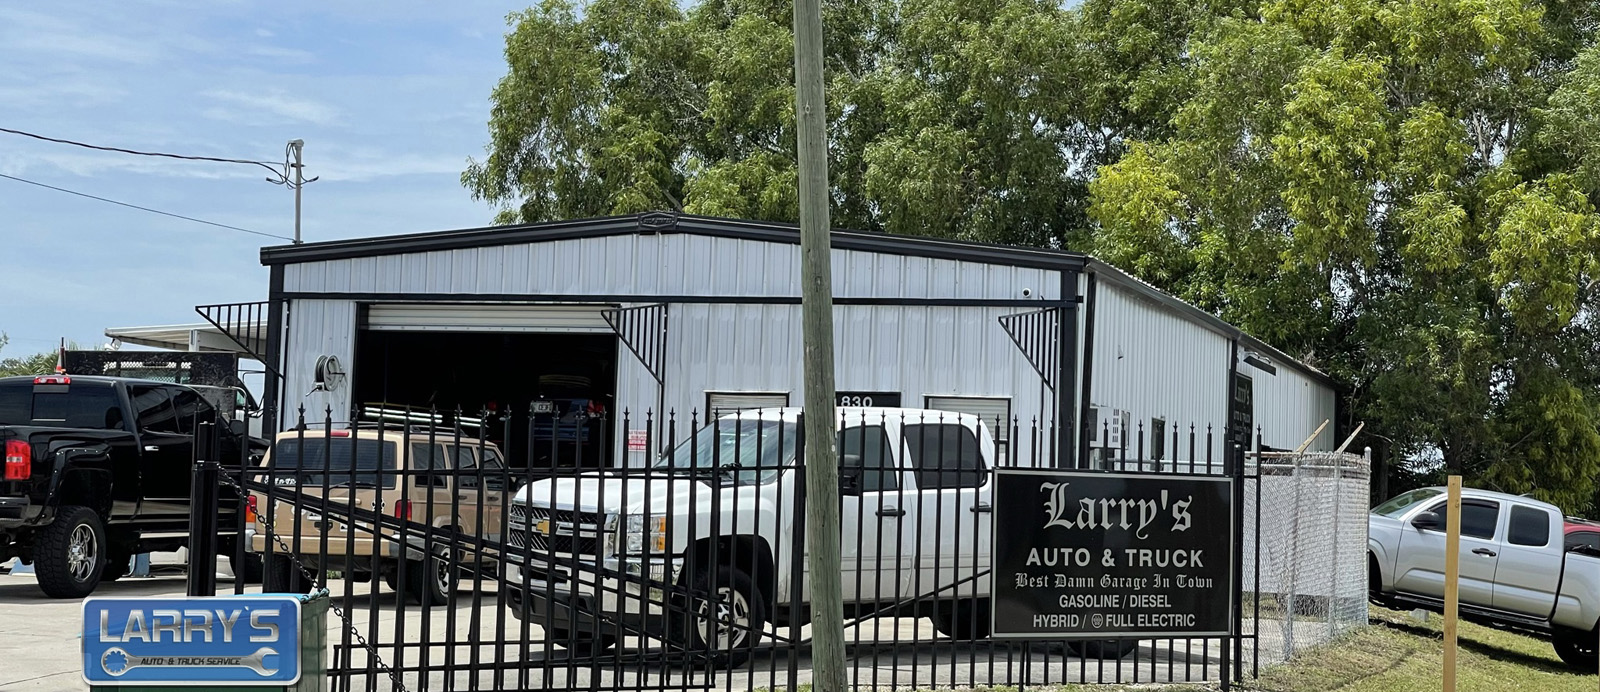 Larry’s Auto and Truck Service Center